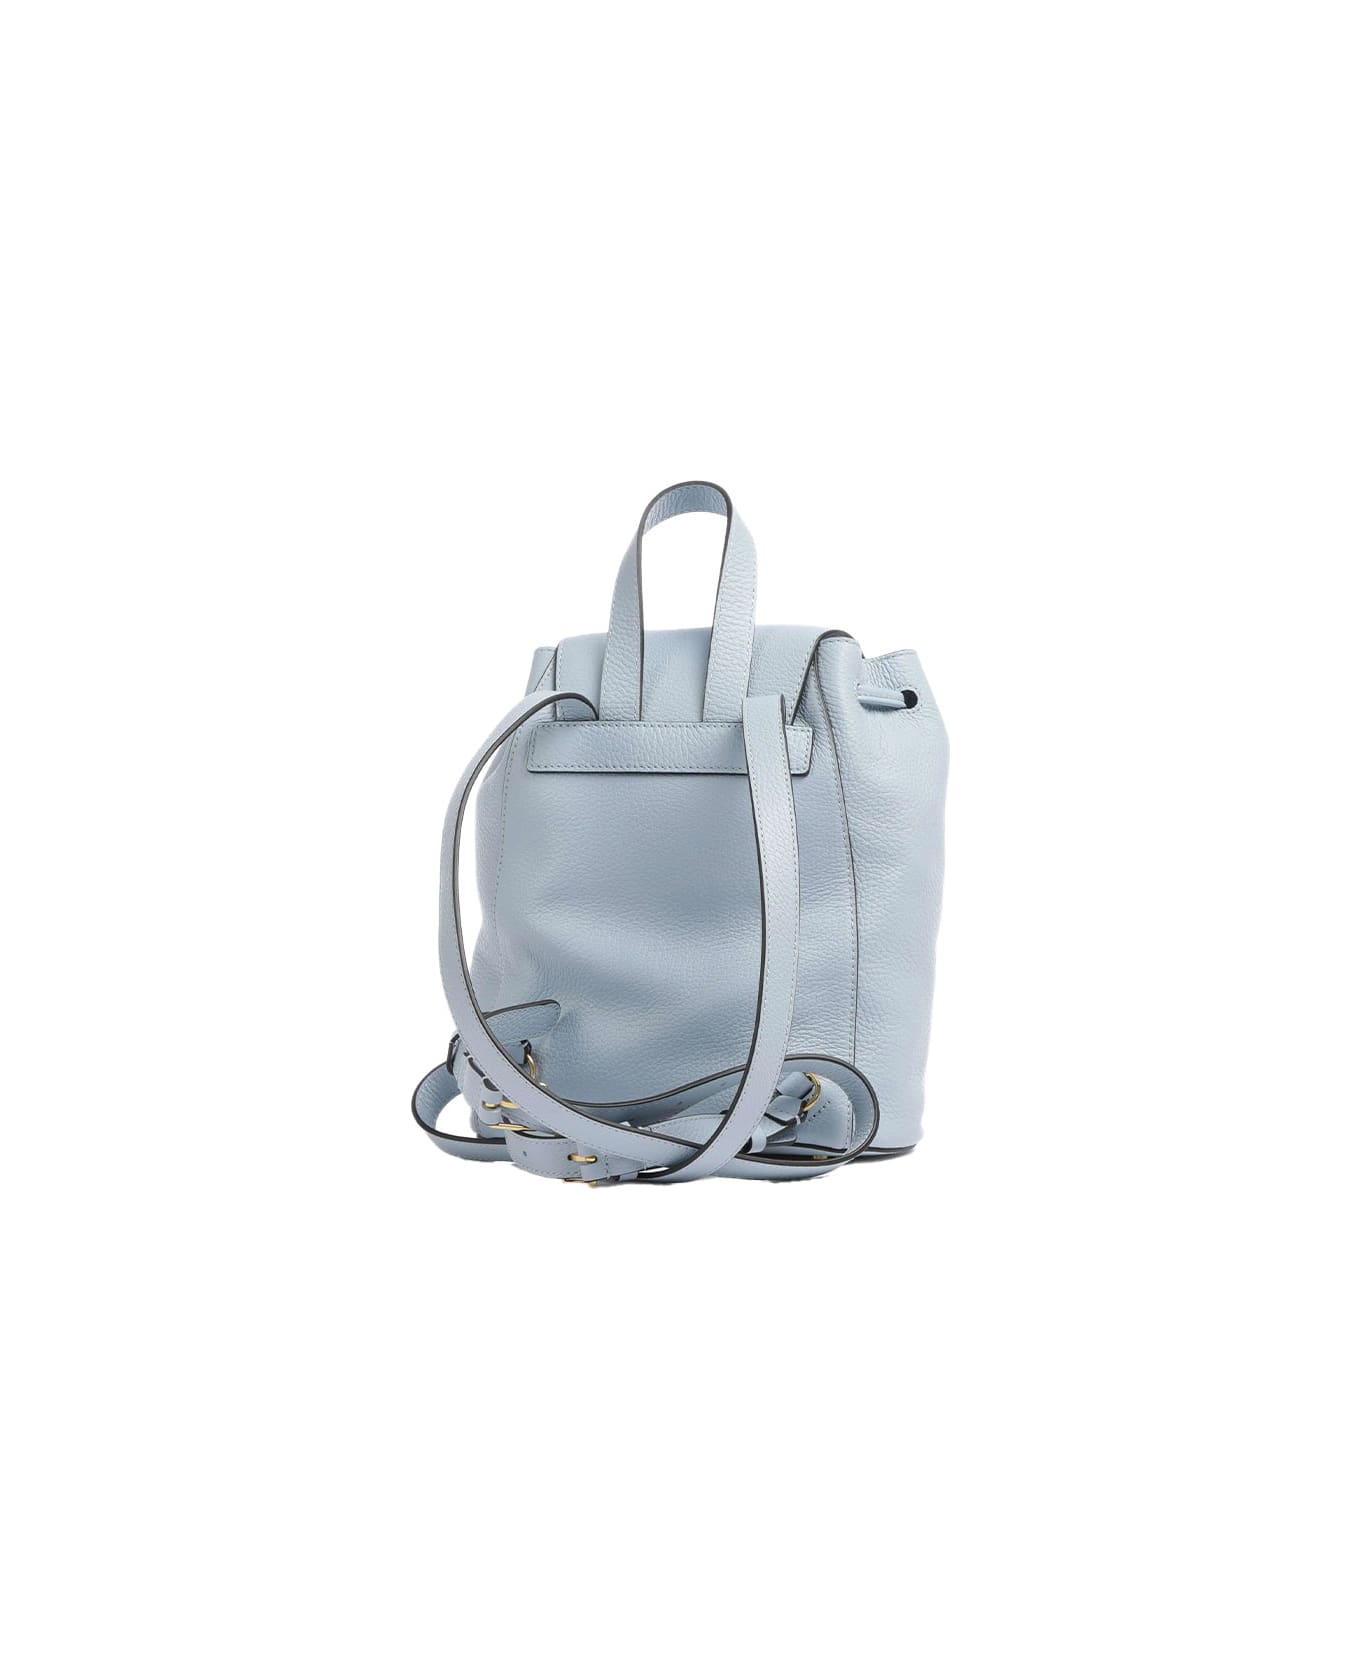 Coccinelle Beat Soft Backpack In Leather - Mist blue